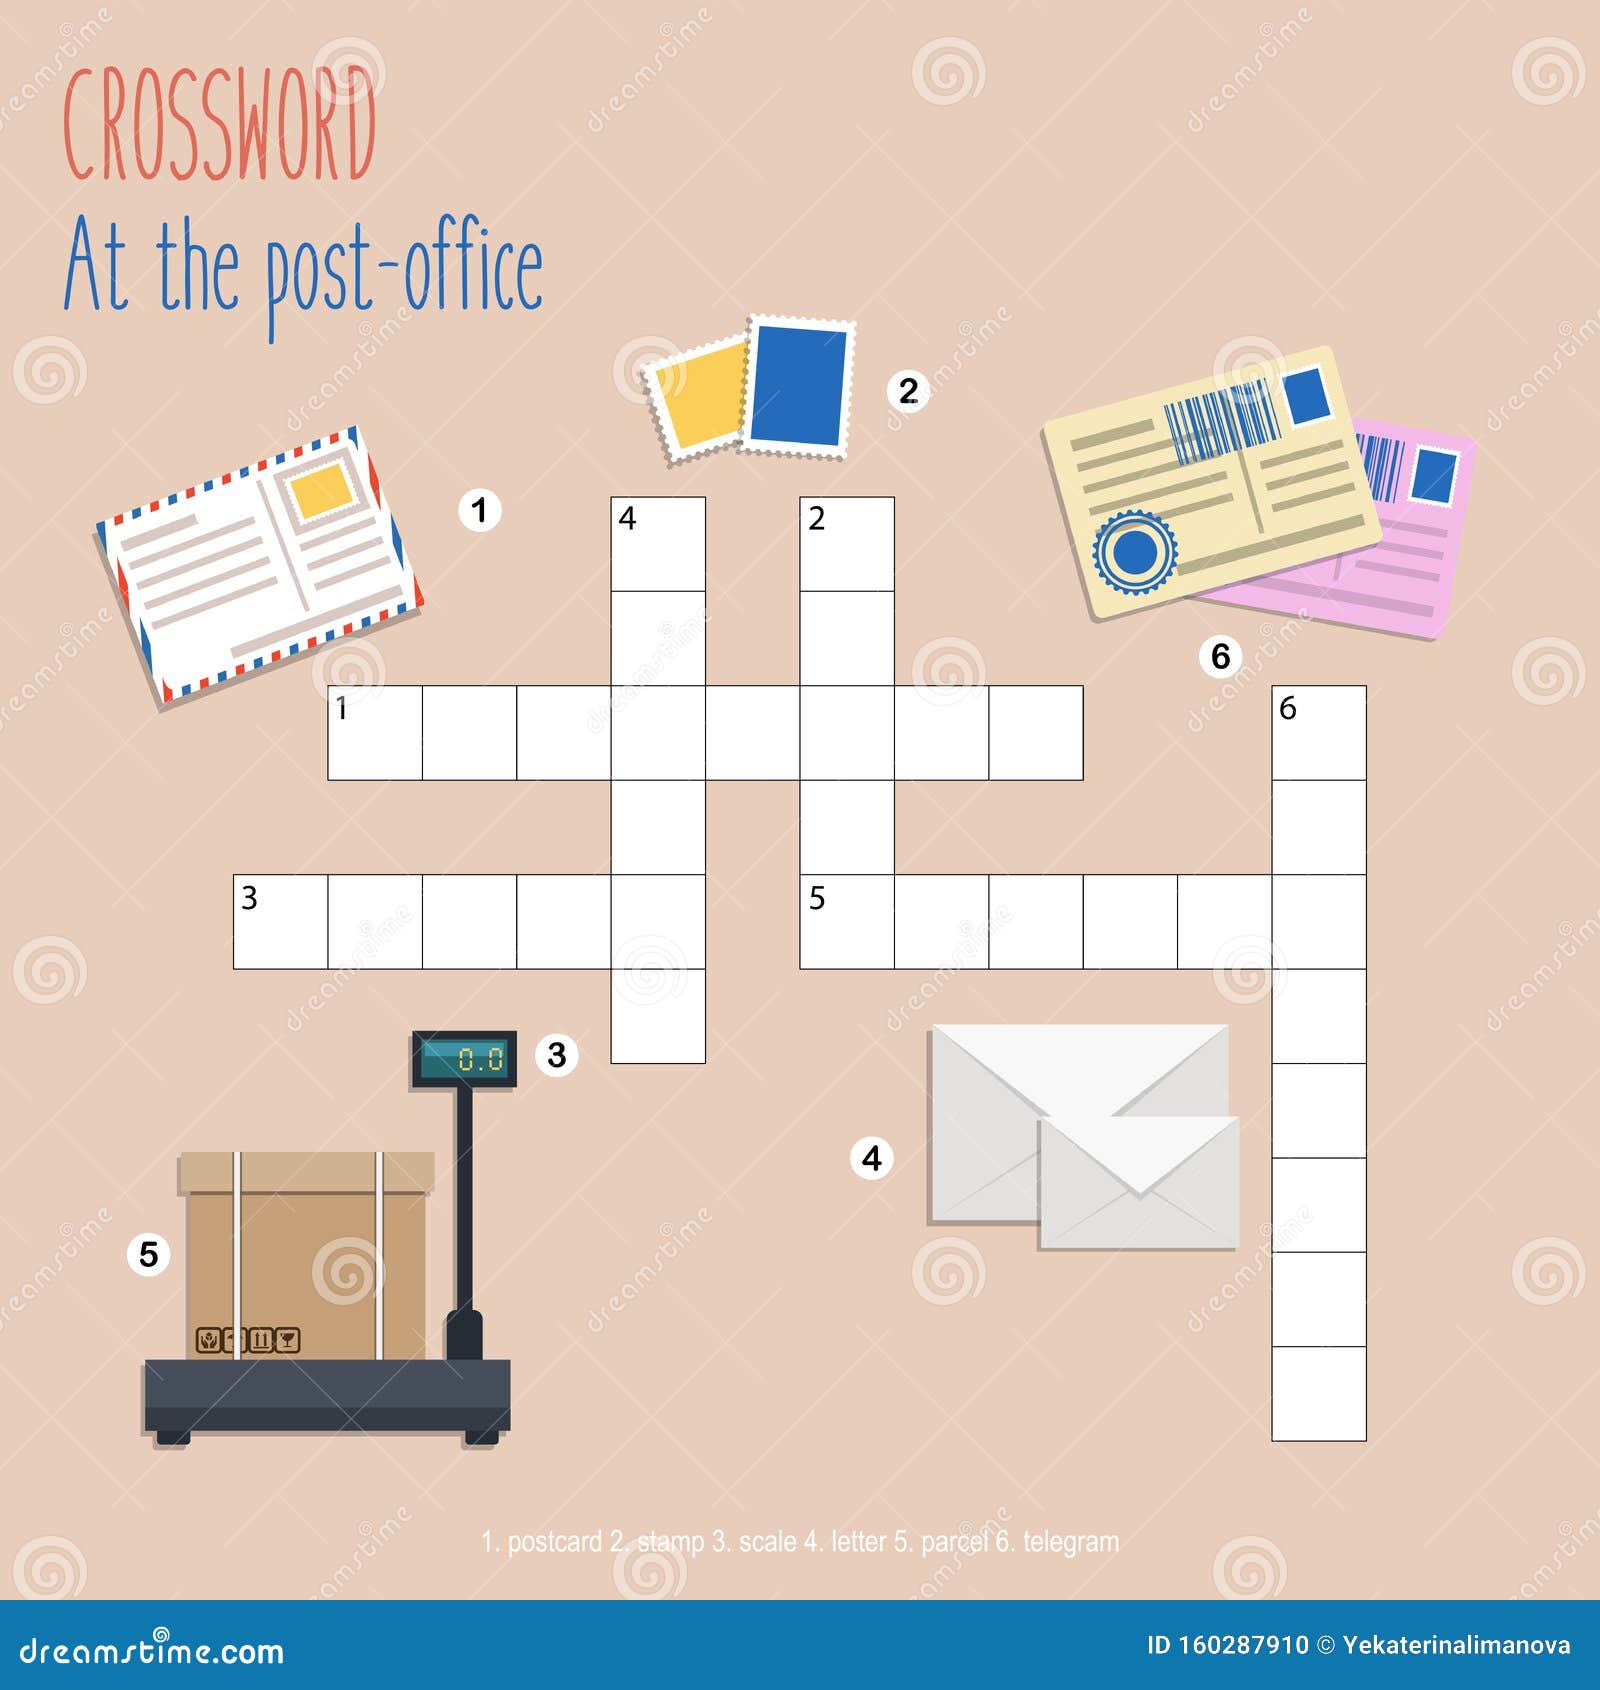 mail carriers assignment crossword